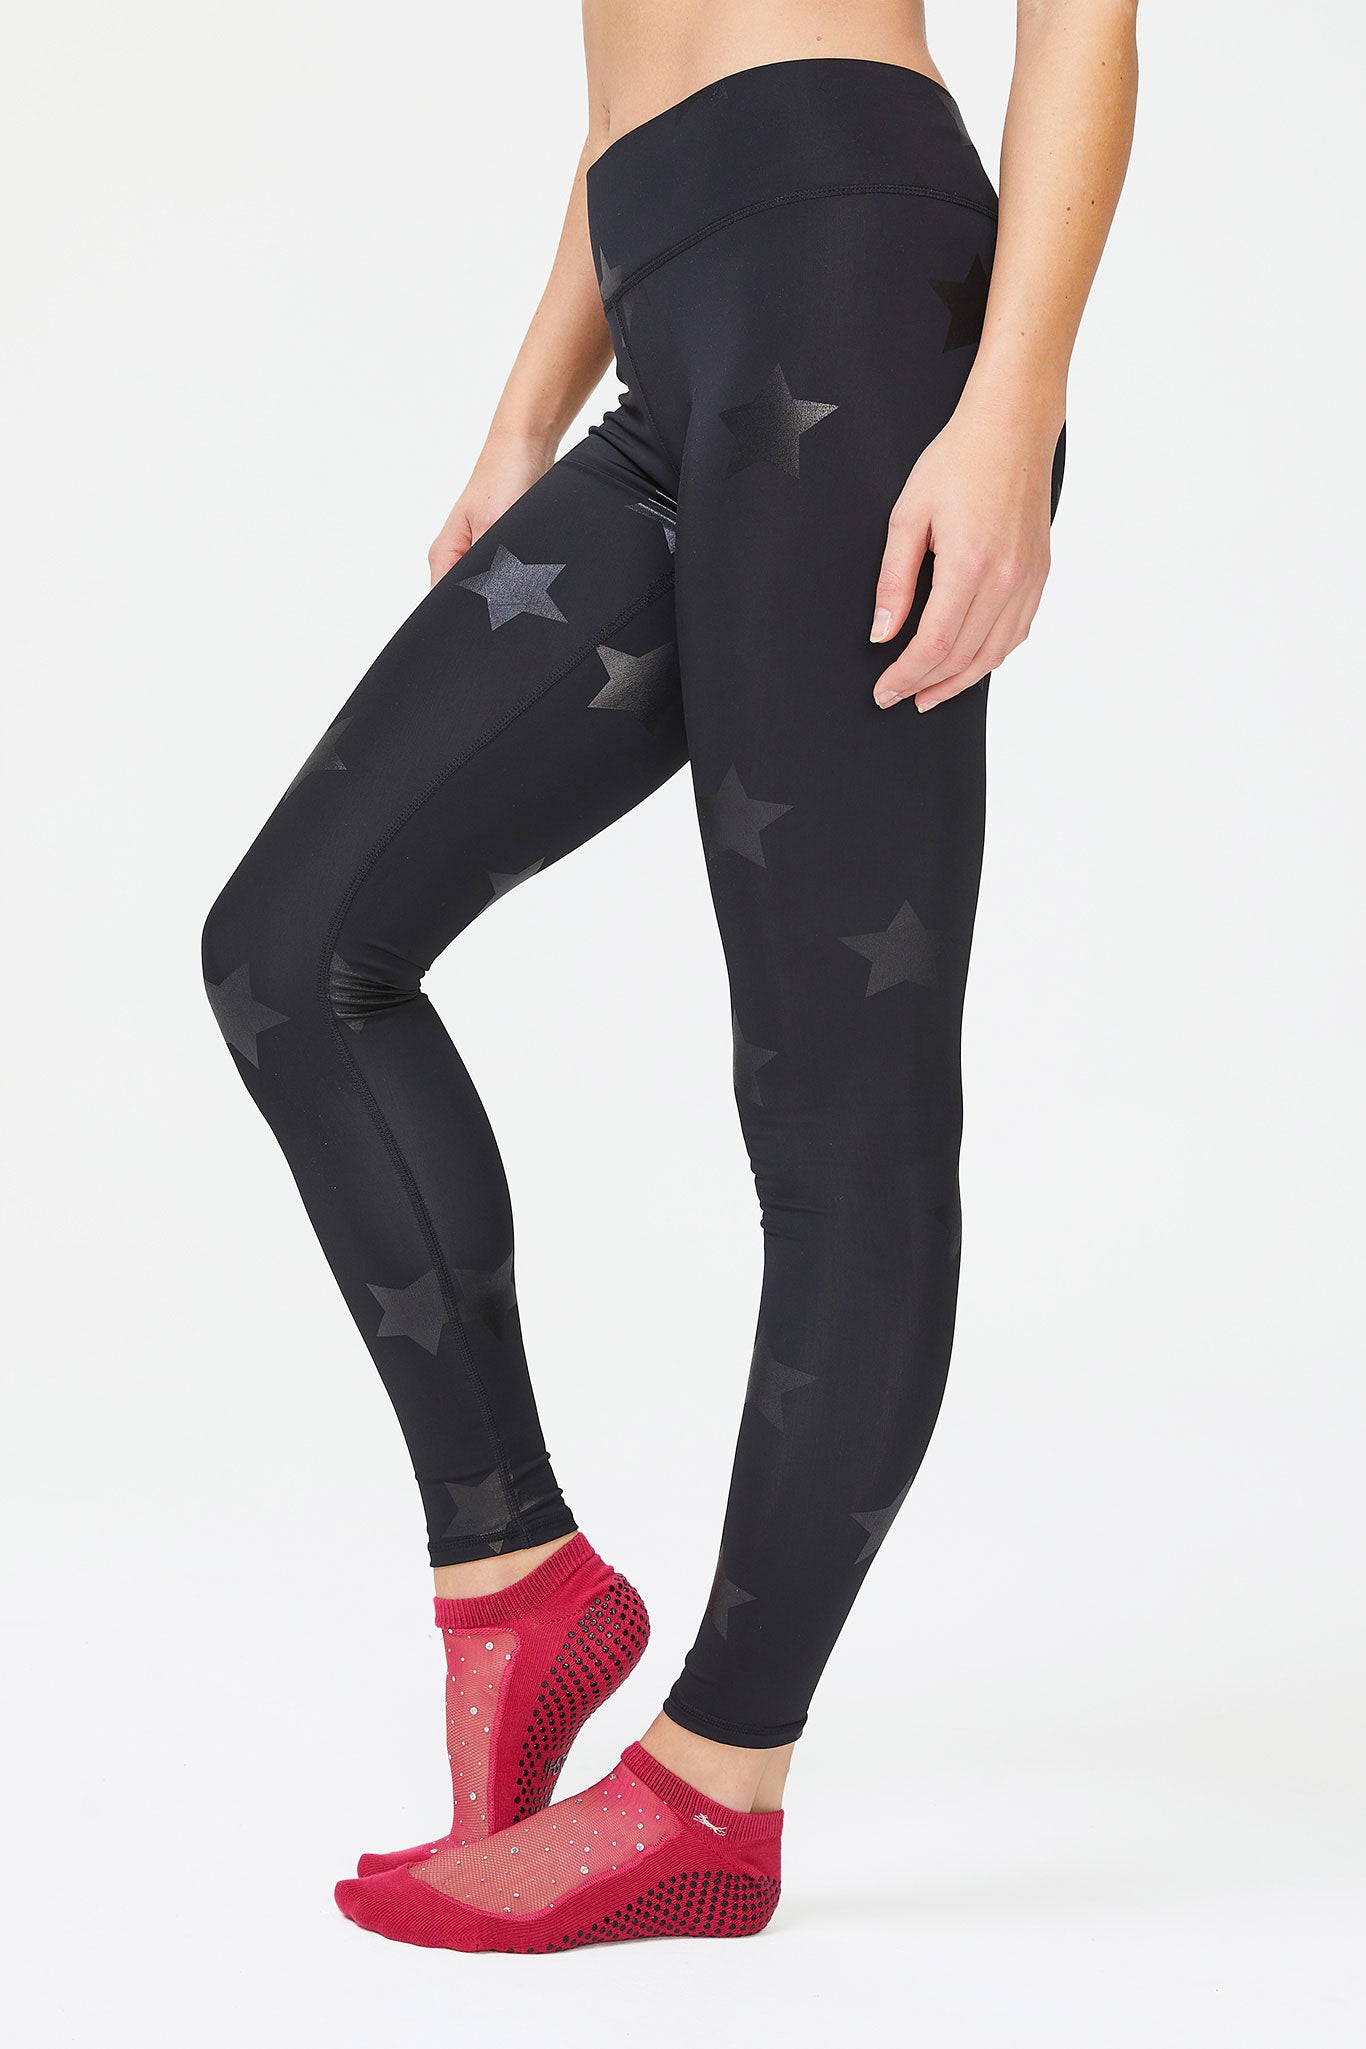 UpLift Leggings in Black Tonal Star Foil with Tall Band